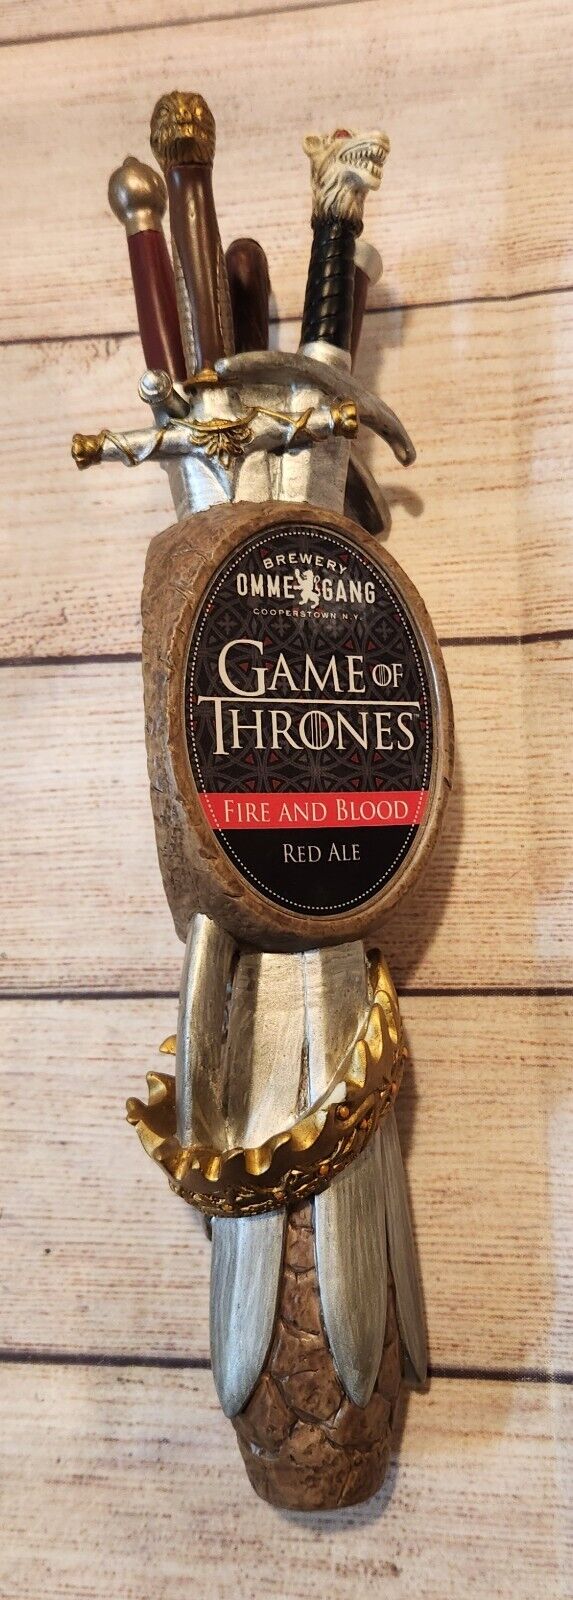 OMMEGANG GAME OF THRONES Fire and Blood Red Ale draft beer tap handle